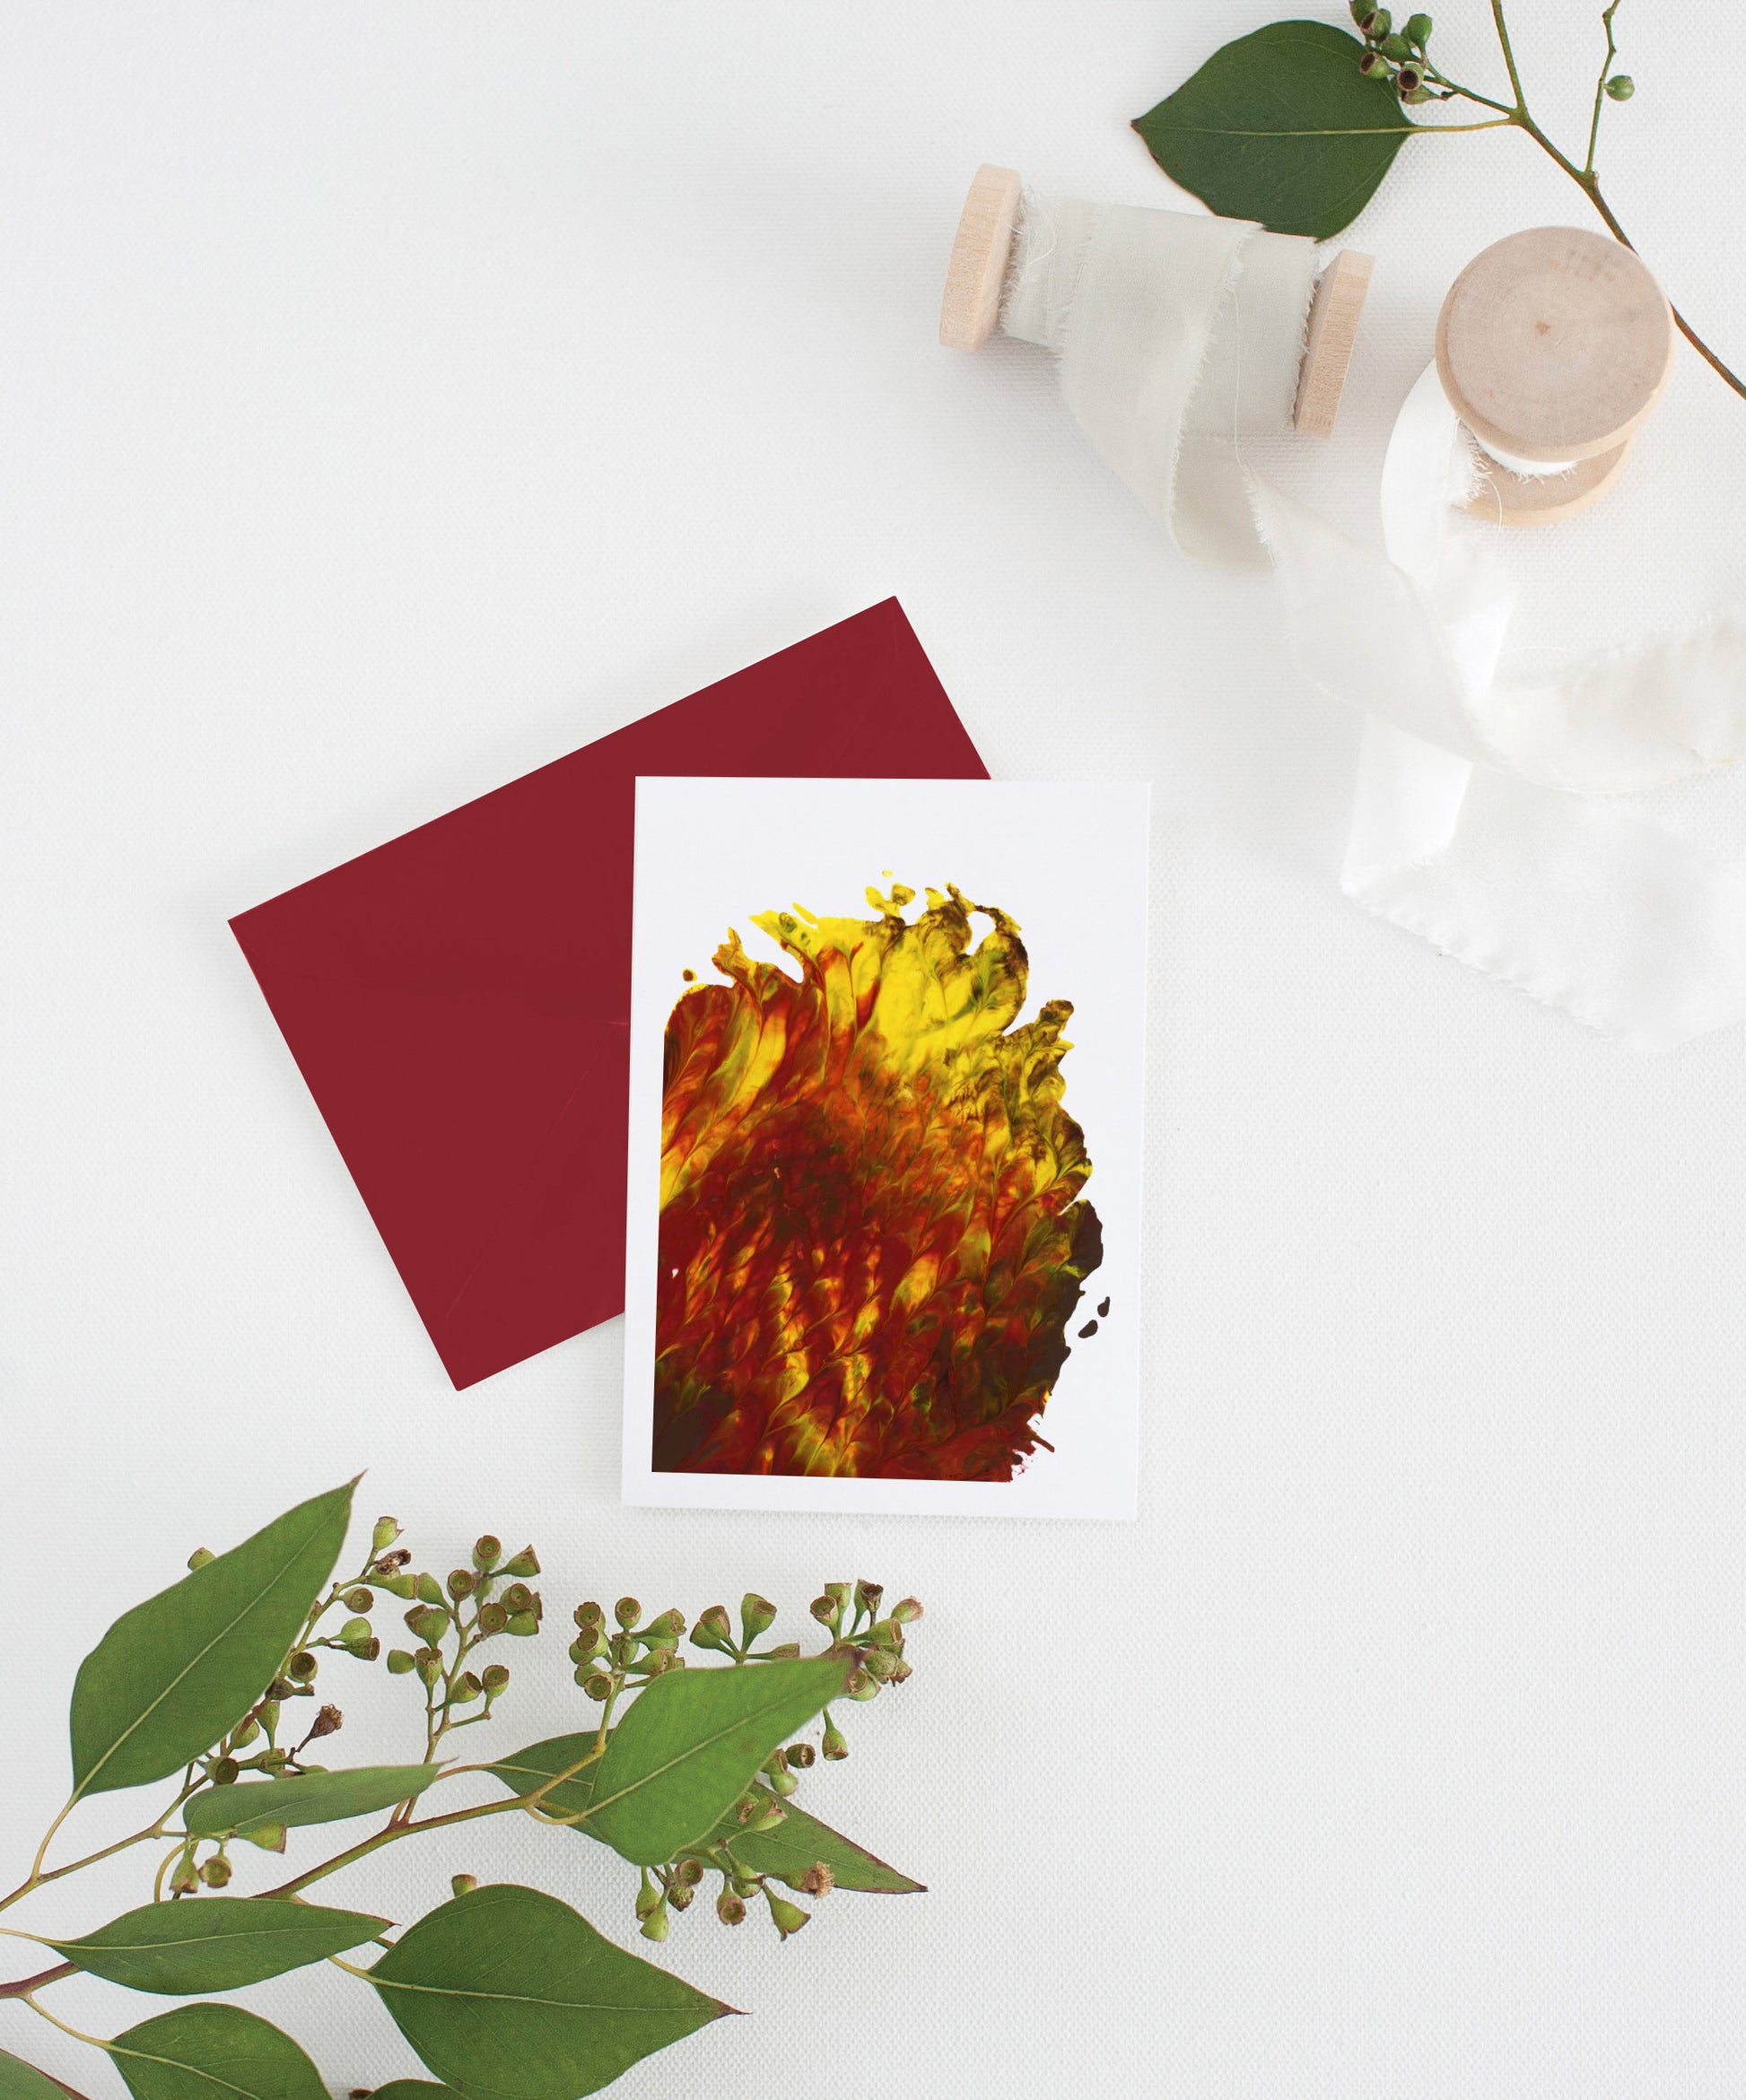 An abstract painting greeting card sits with a red envelope on a white background.  There are leaves and two small spools of white fabric ribbon near it.